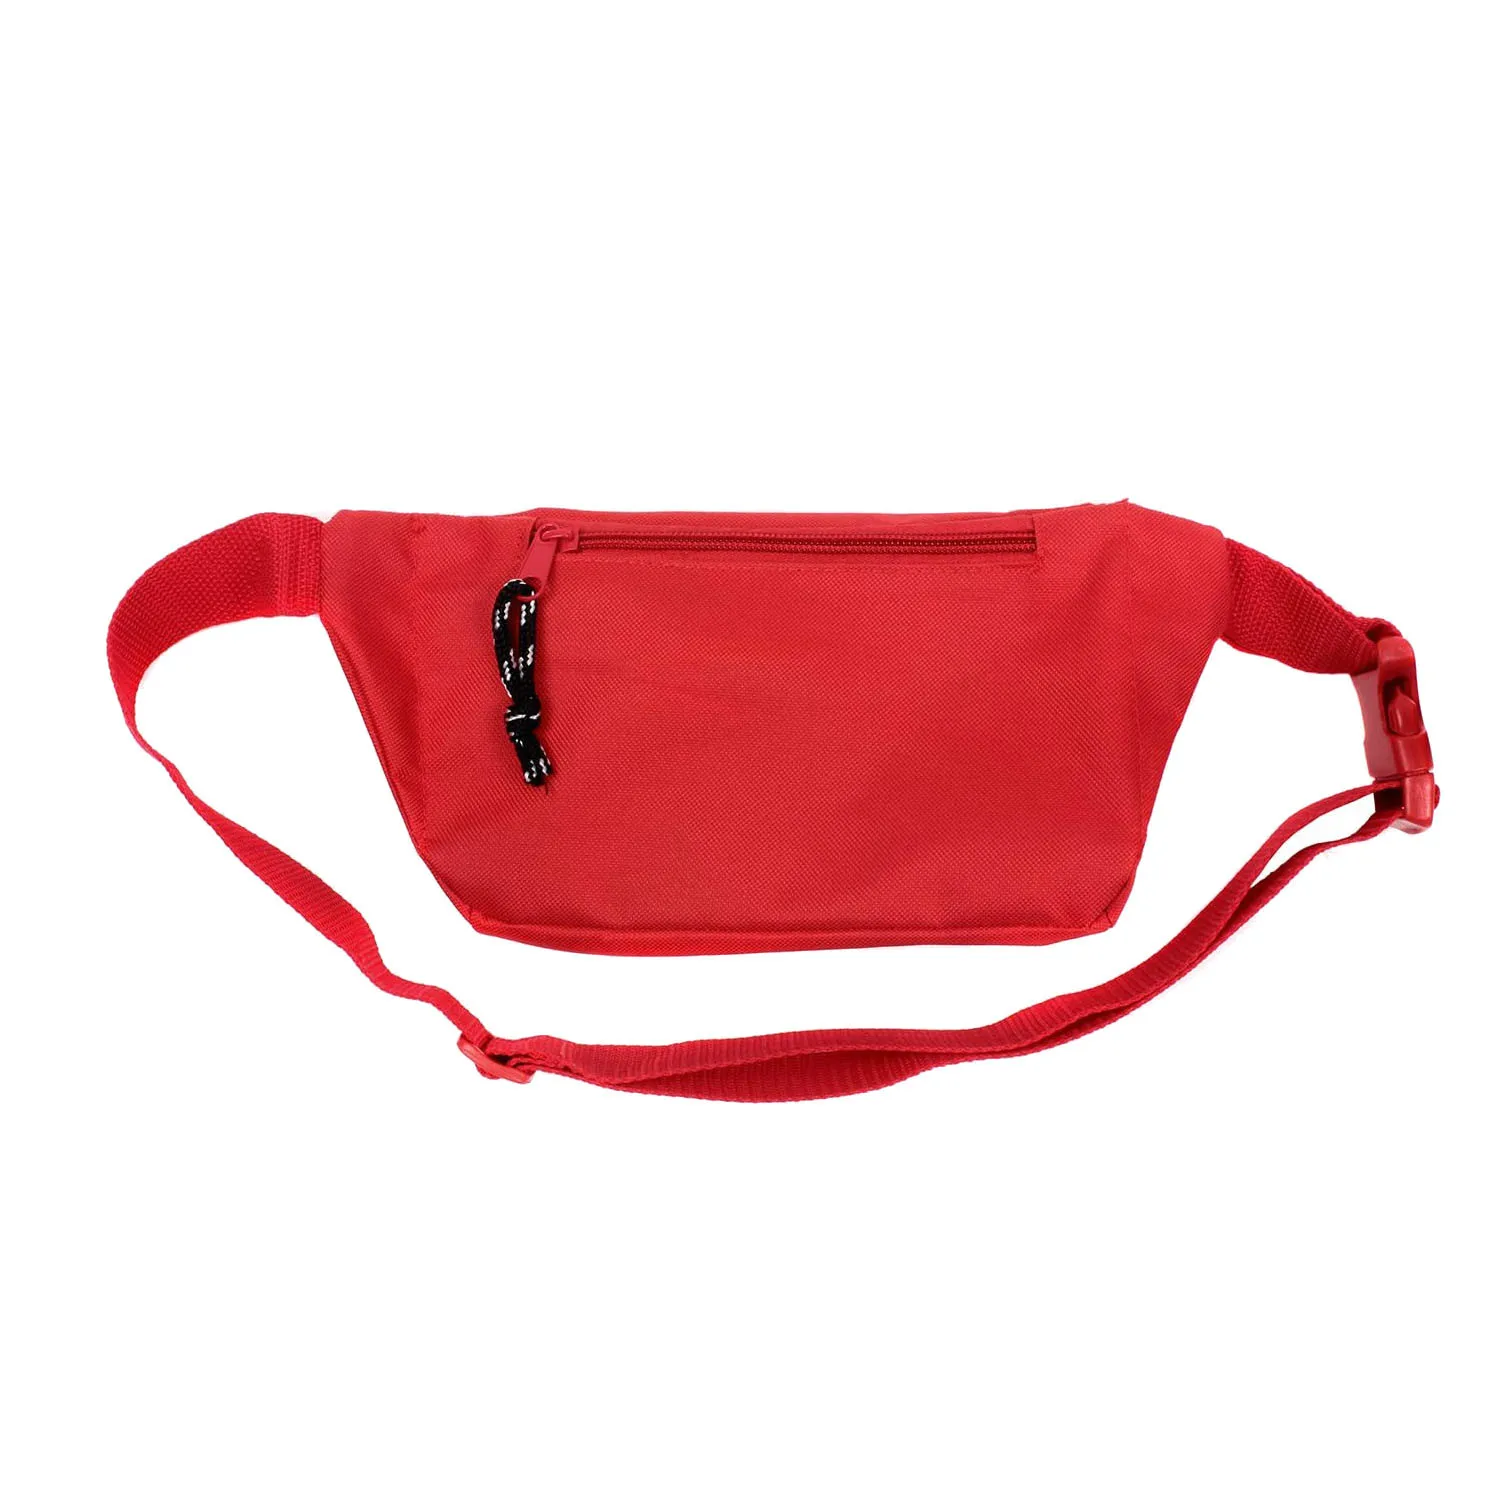 Practical Lifeguard Fanny Pack For Outdoor - Buy Multifunctional First ...